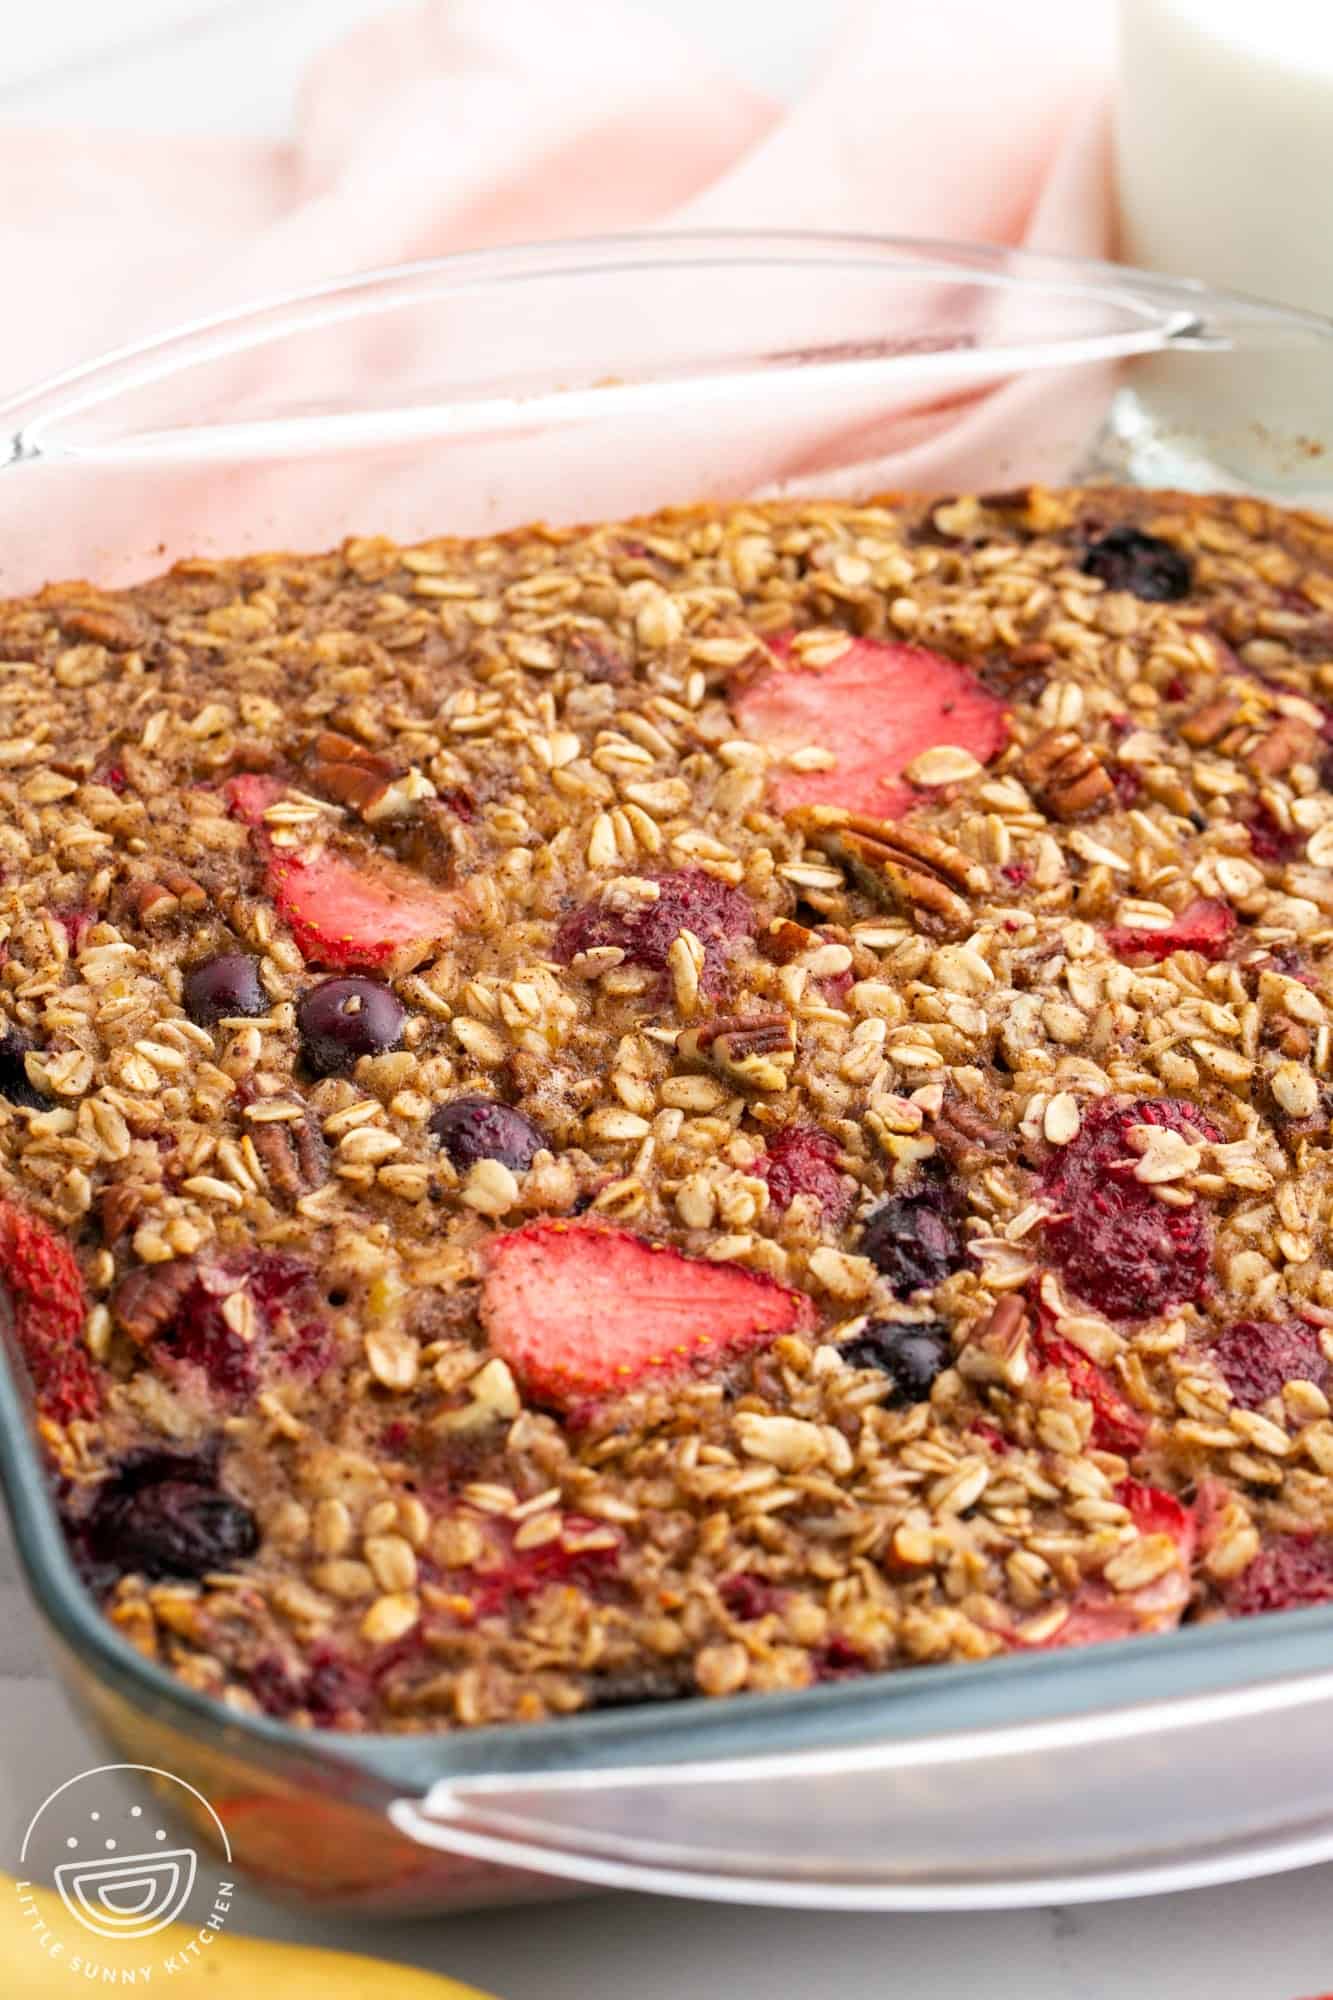 Baked oatmeal in a square pan, topped with strawberries and raspberries.